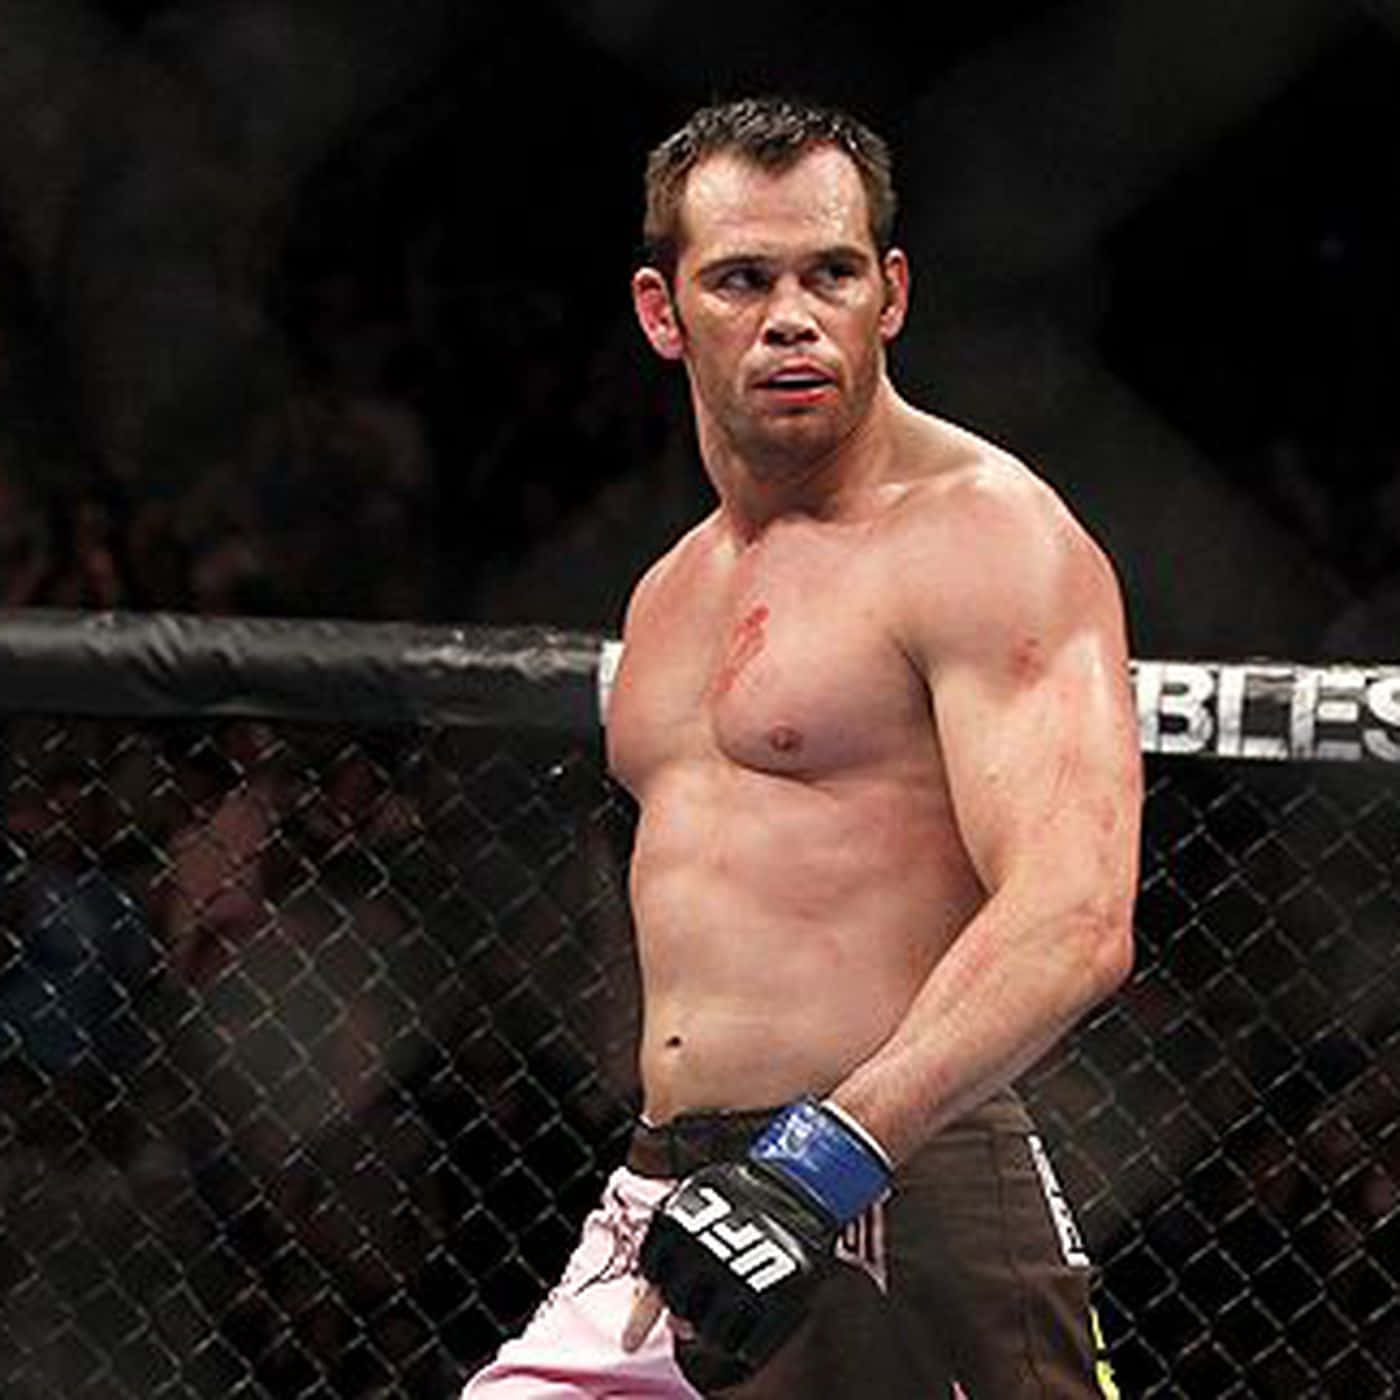 Caption: Intense Bout - Rich Franklin In The Ring Wallpaper